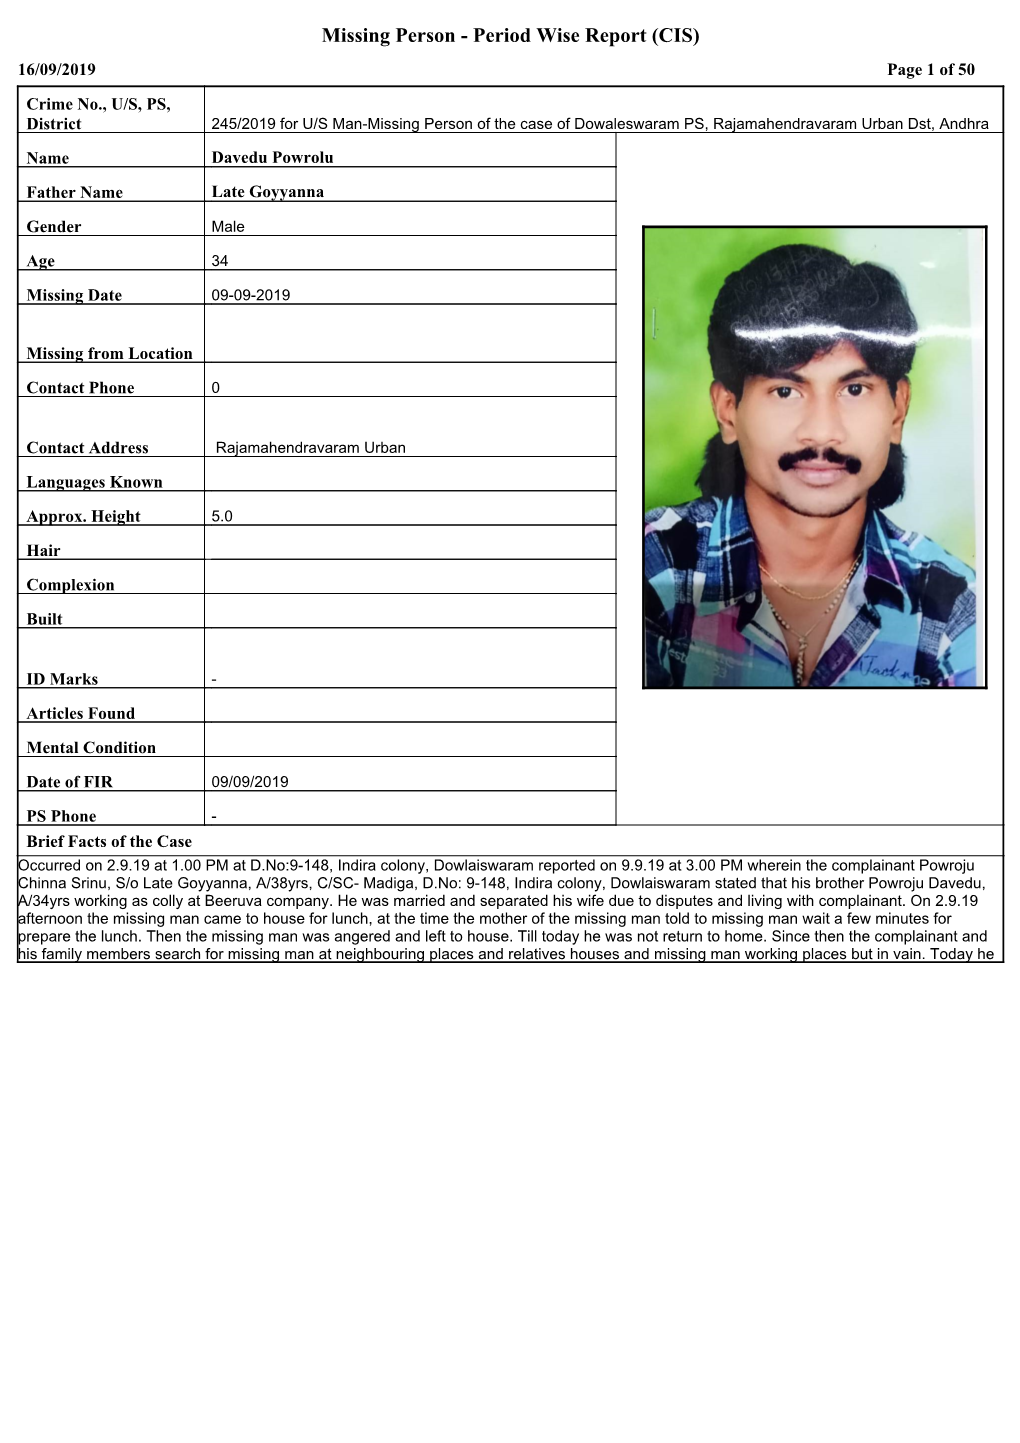 Missing Person - Period Wise Report (CIS) 16/09/2019 Page 1 of 50